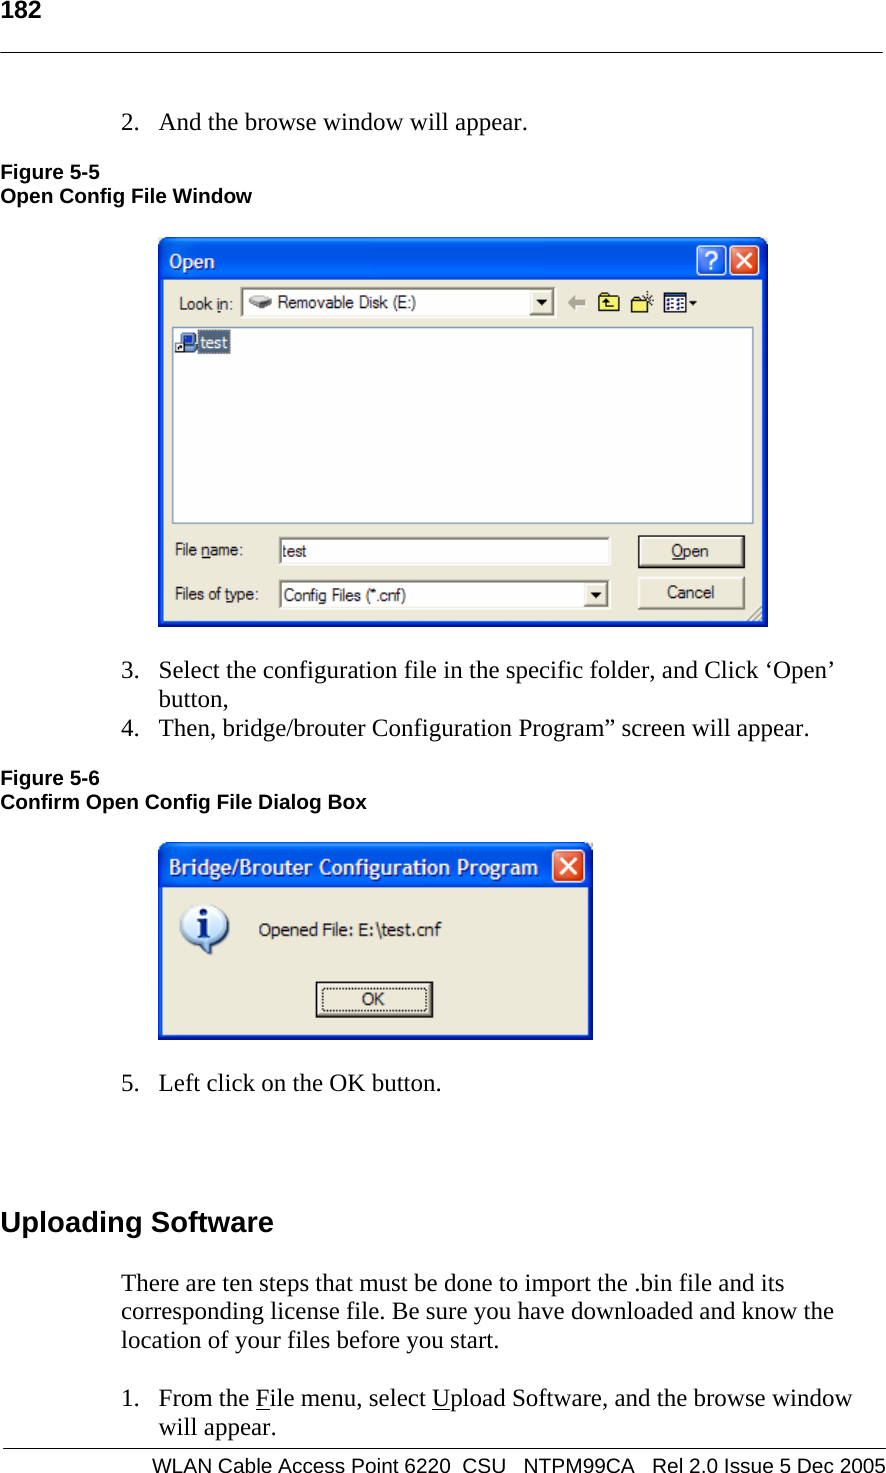   182    WLAN Cable Access Point 6220  CSU   NTPM99CA   Rel 2.0 Issue 5 Dec 2005 2. And the browse window will appear.  Figure 5-5 Open Config File Window    3. Select the configuration file in the specific folder, and Click ‘Open’ button, 4. Then, bridge/brouter Configuration Program” screen will appear.  Figure 5-6 Confirm Open Config File Dialog Box    5. Left click on the OK button.    Uploading Software There are ten steps that must be done to import the .bin file and its corresponding license file. Be sure you have downloaded and know the location of your files before you start. 1. From the File menu, select Upload Software, and the browse window will appear. 